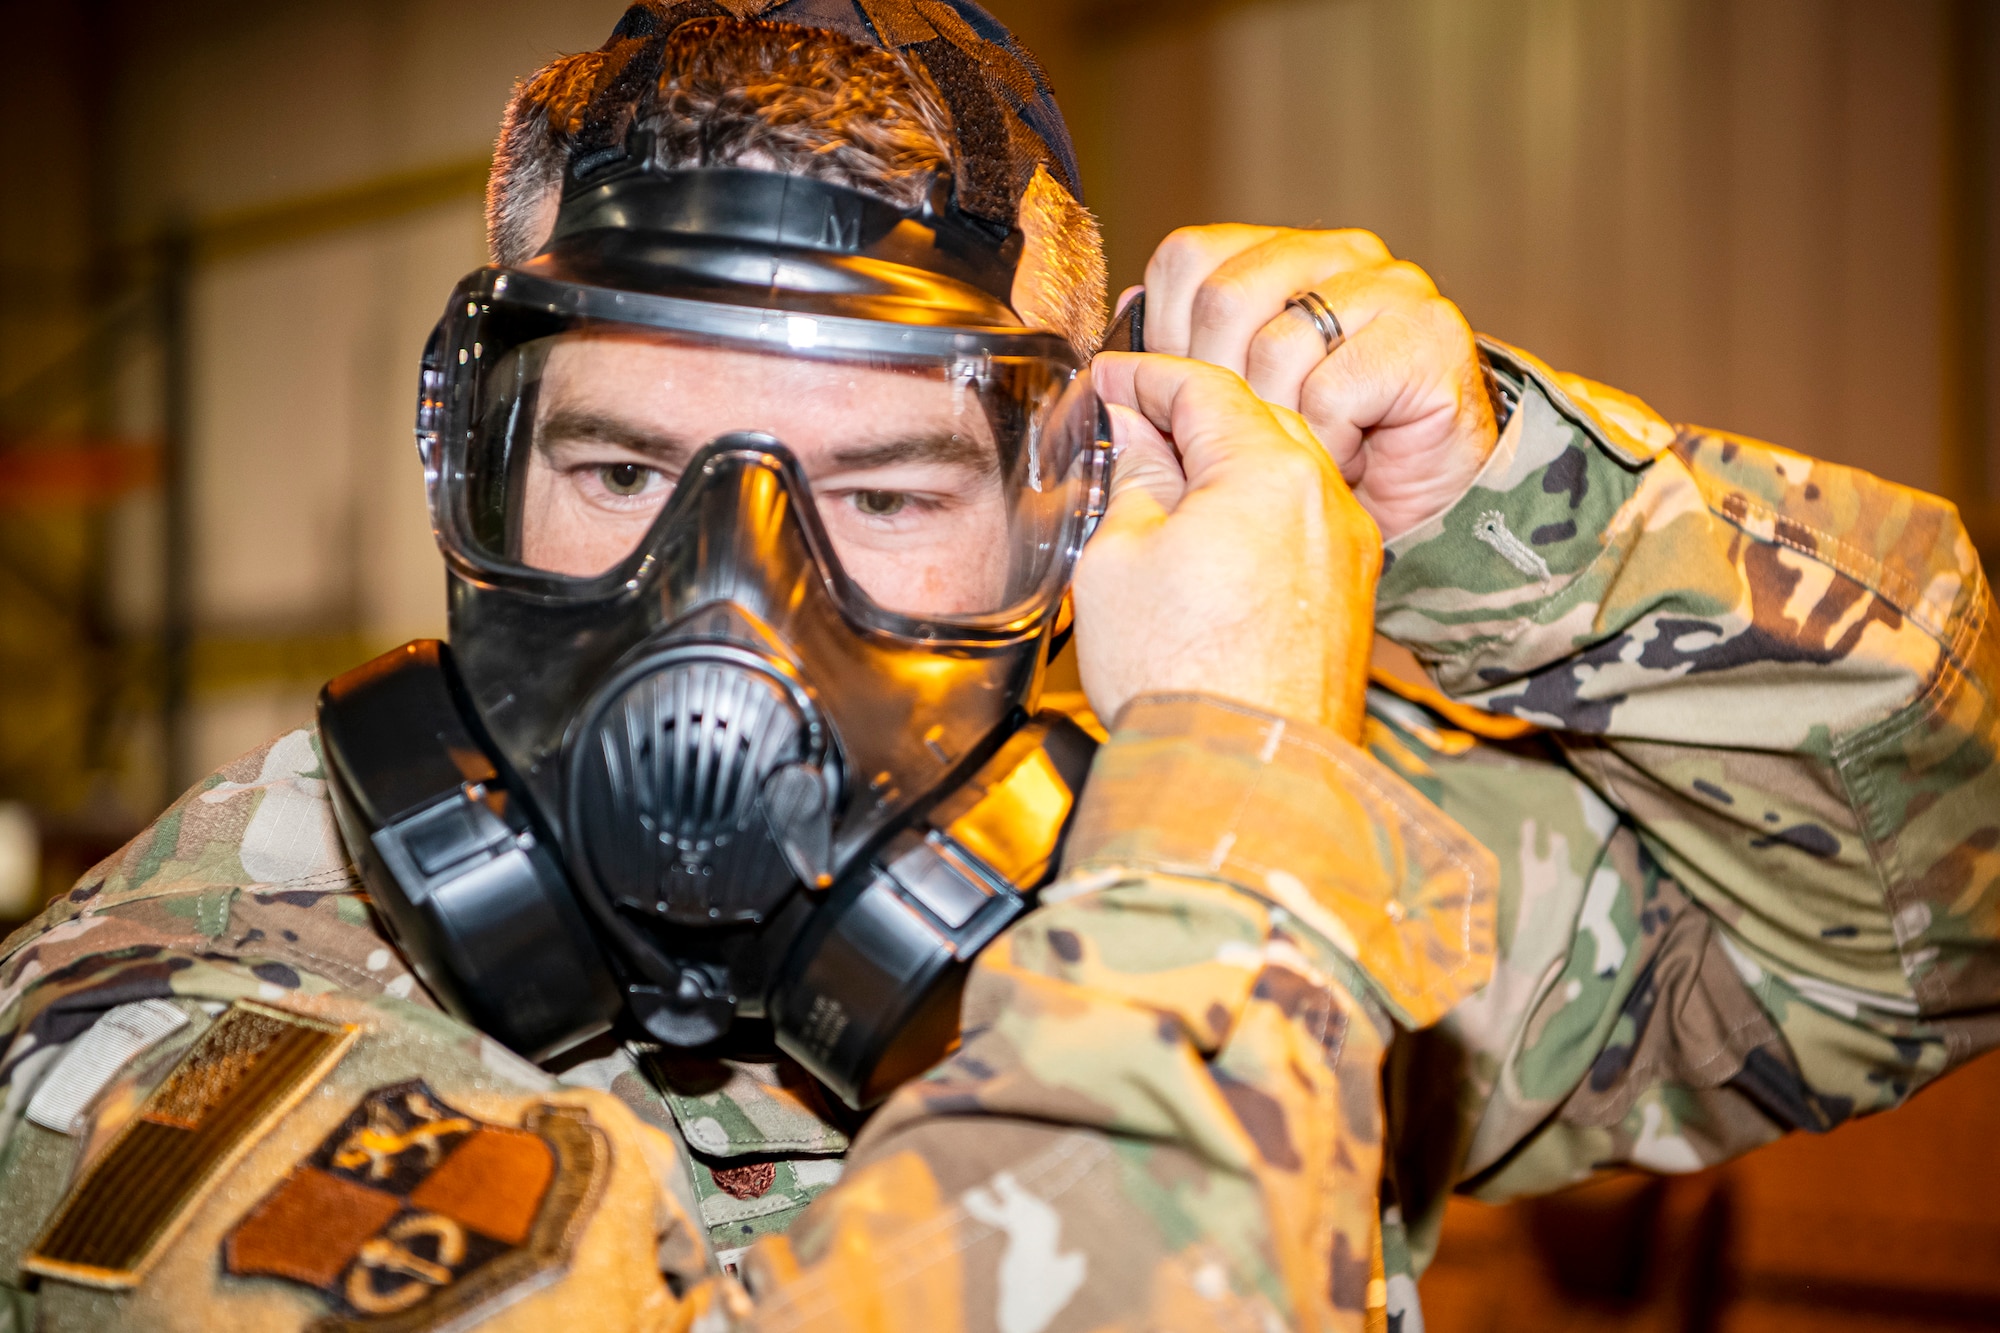 U.S. Air Force Col. Brian Filler, 501st Combat Support Wing commander, adjusts his gas mask during Ability to Survive and Operate training at RAF Alconbury, England, Aug. 27, 2021. Filler along with other Airmen from the 501st CSW participated in the ATSO rodeo to get a refresher on how to properly utilize their MOPP gear in a potential chemical environment. (U.S. Air Force photo by Senior Airman Eugene Oliver)